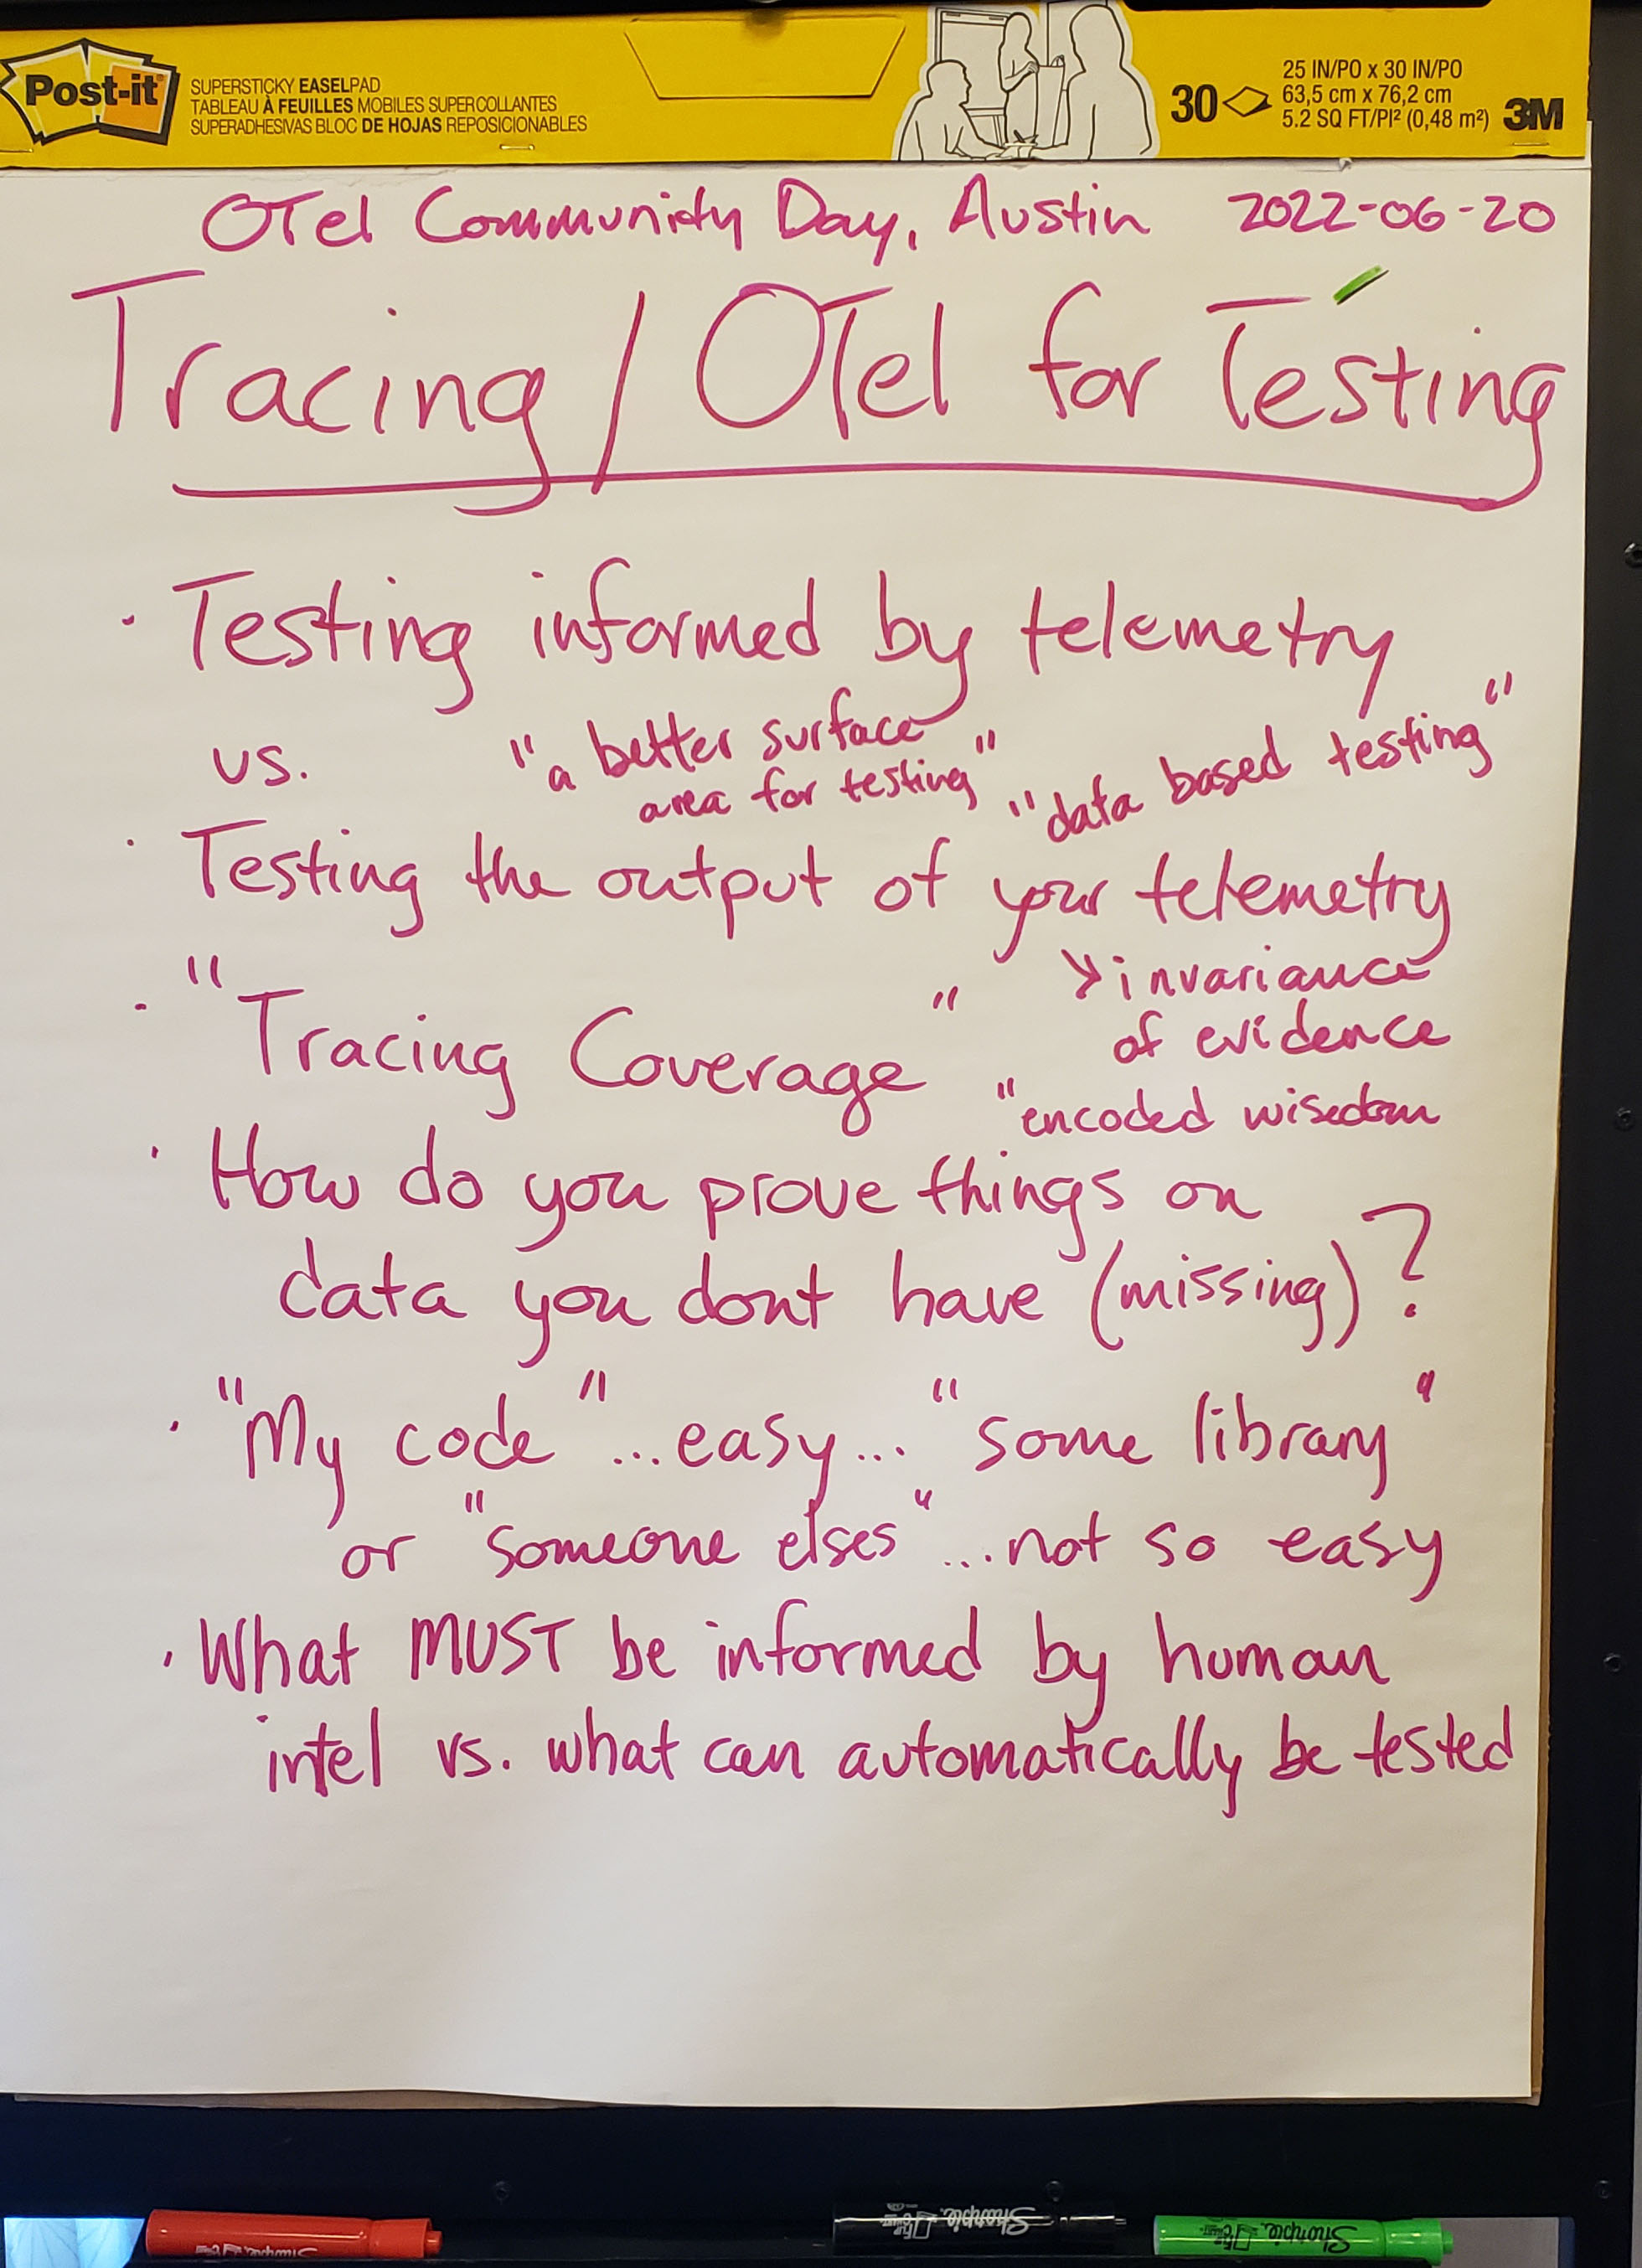 Key discussion points about OpenTelemetry and Testing